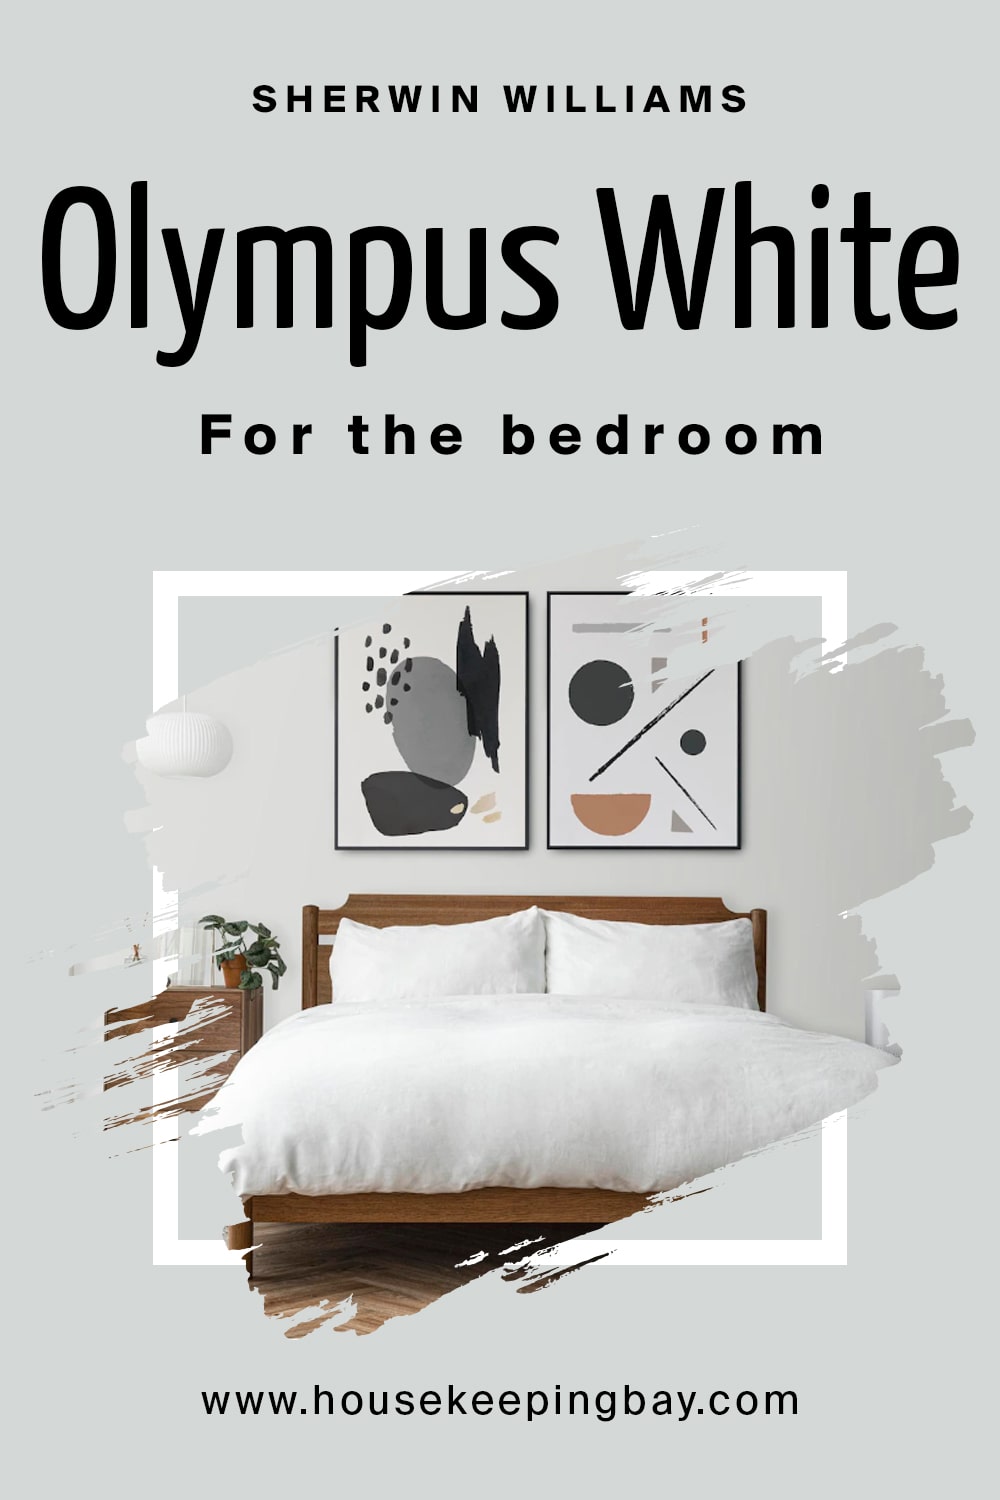 Sherwin Williams.Olympus White For the bedroom